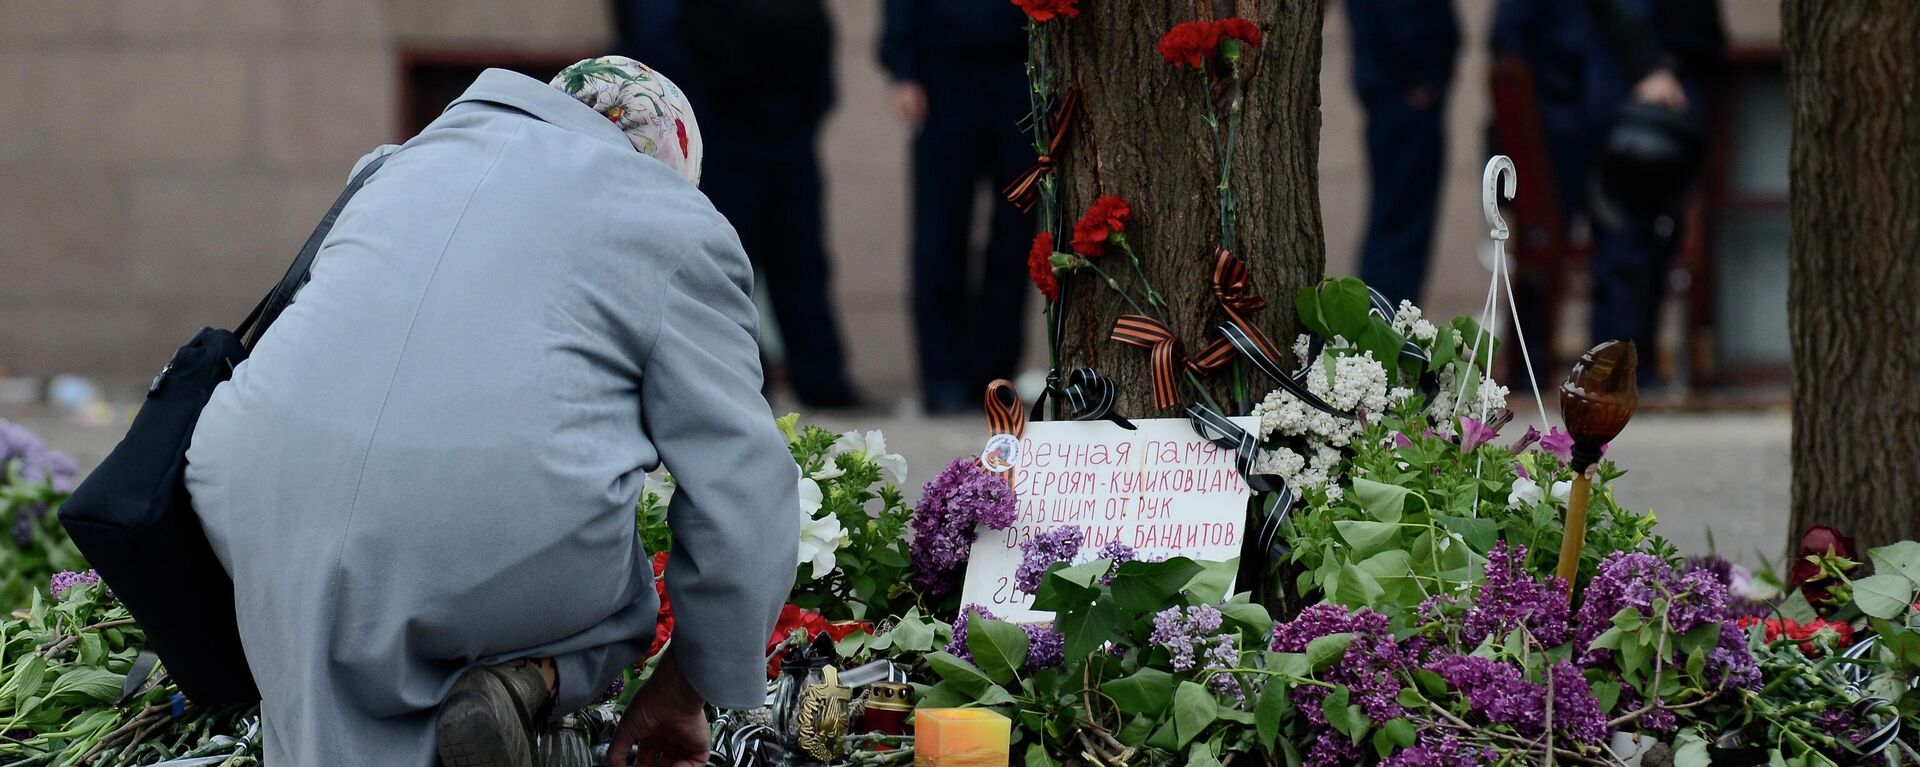 A woman lays flowers to commemorate the memory of those, who died from fire at Odessa's House of Trade Unions, at Kulikovo Field Square.
 - Sputnik Абхазия, 1920, 24.02.2022